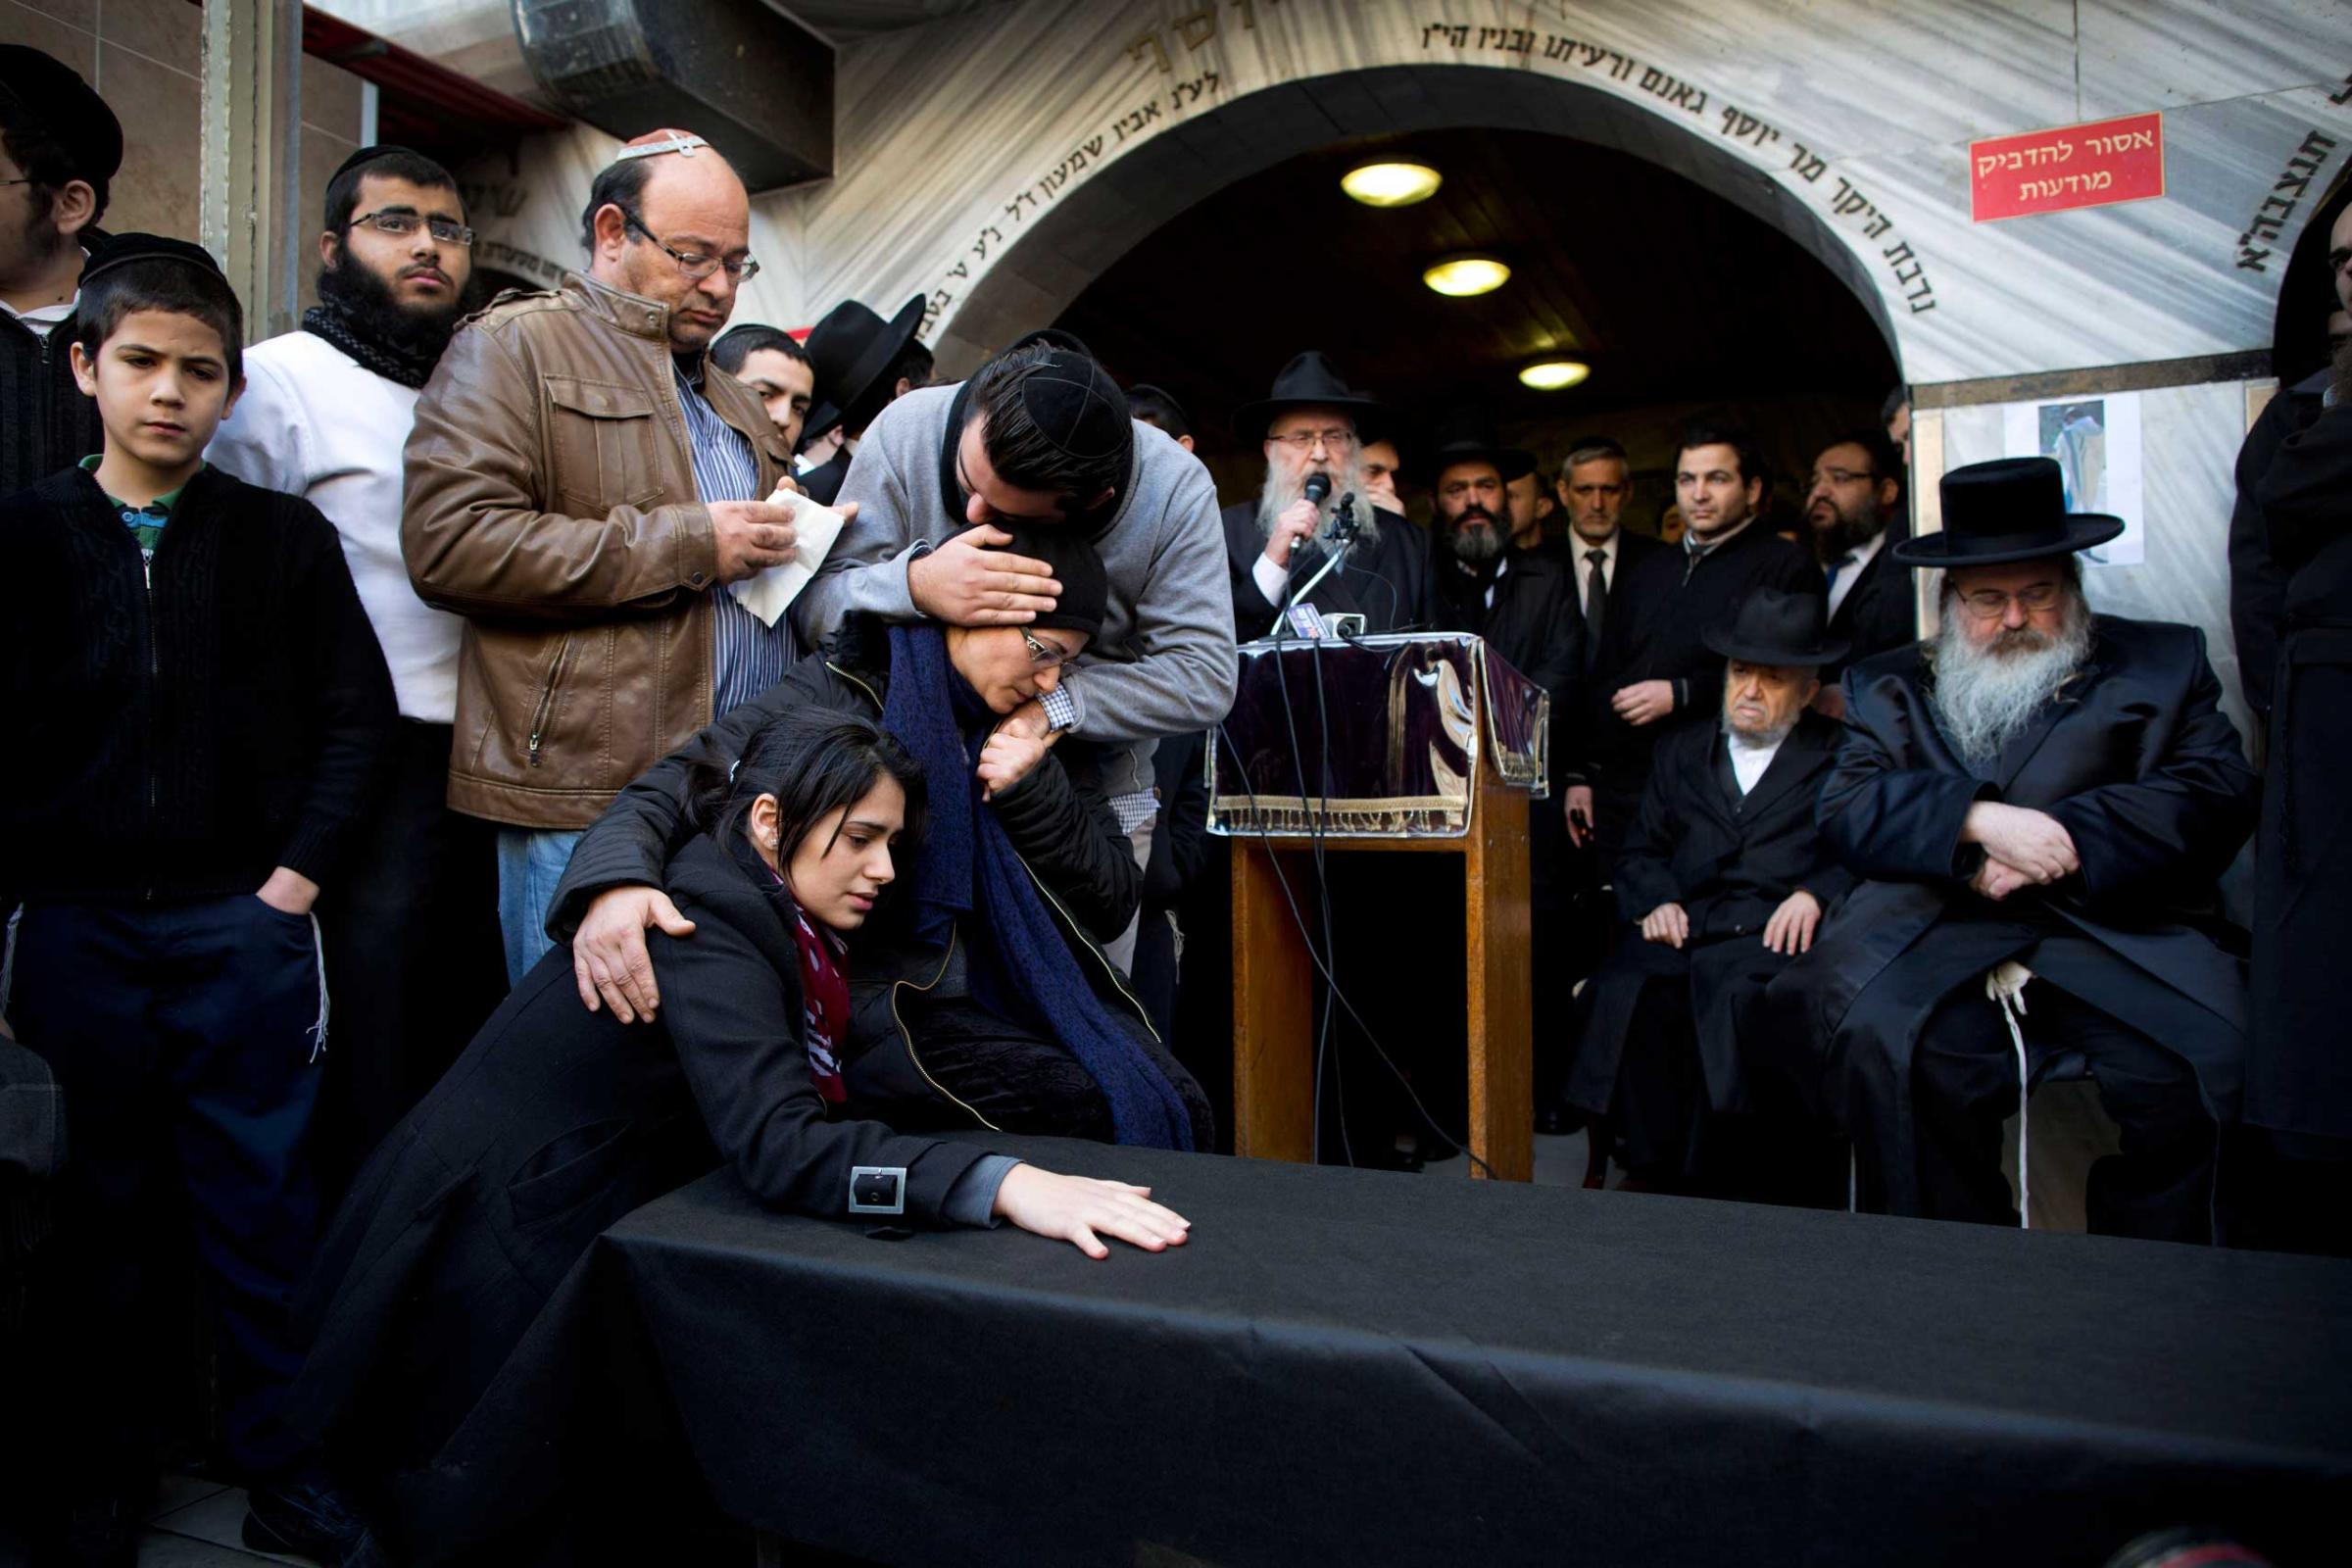 Family and relatives of French Jew Yoav Hattab, a victim of the attack on a kosher grocery store in Paris, gather around a symbolic coffin for his funeral procession in the city of Bnei Brak near Tel Aviv, Israel, Jan. 13, 2015.